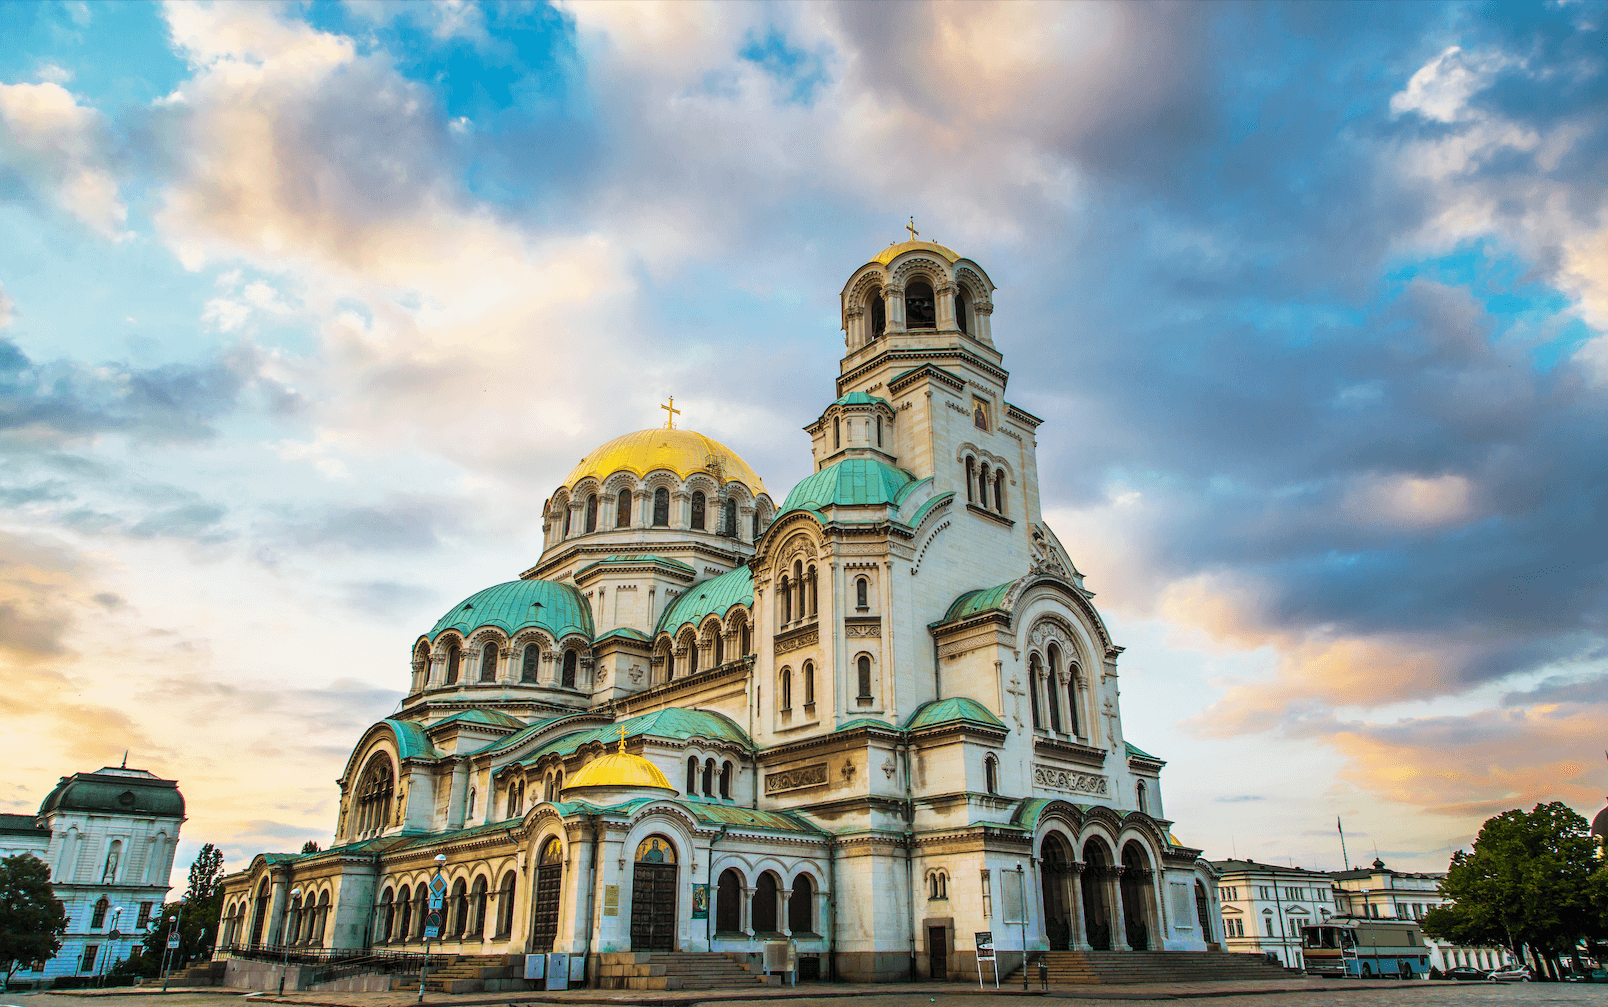 St. Alexander Nevsky Cathedral in the center of Sofia, capital of Bulgaria against the blue morning sky with colorful clouds